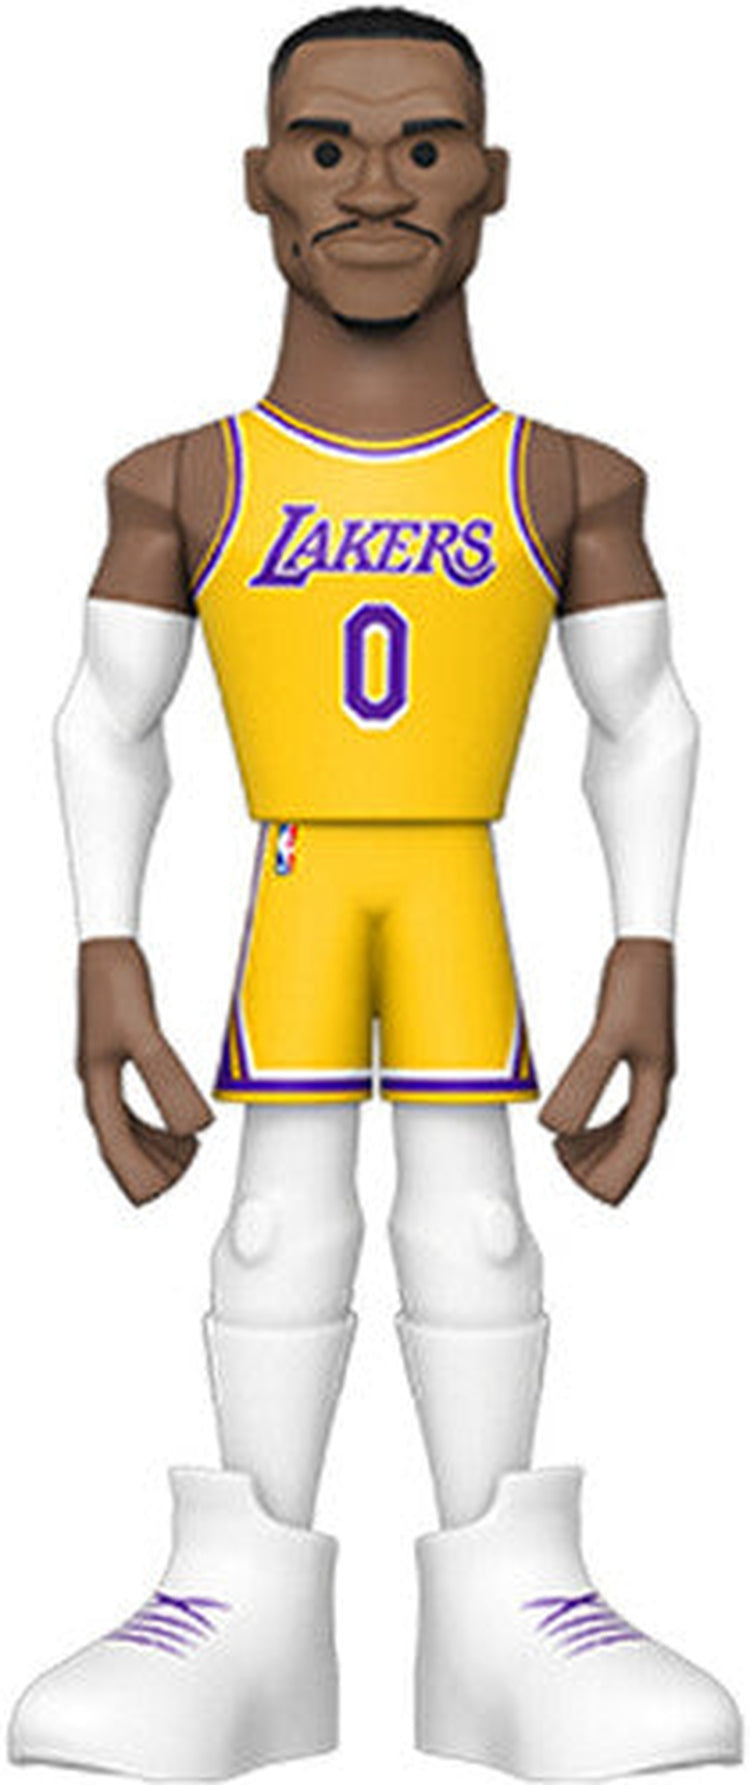 FUNKO GOLD 5 NBA:Lakers - Russell Westbrook (CE'21) (Styles May Vary)